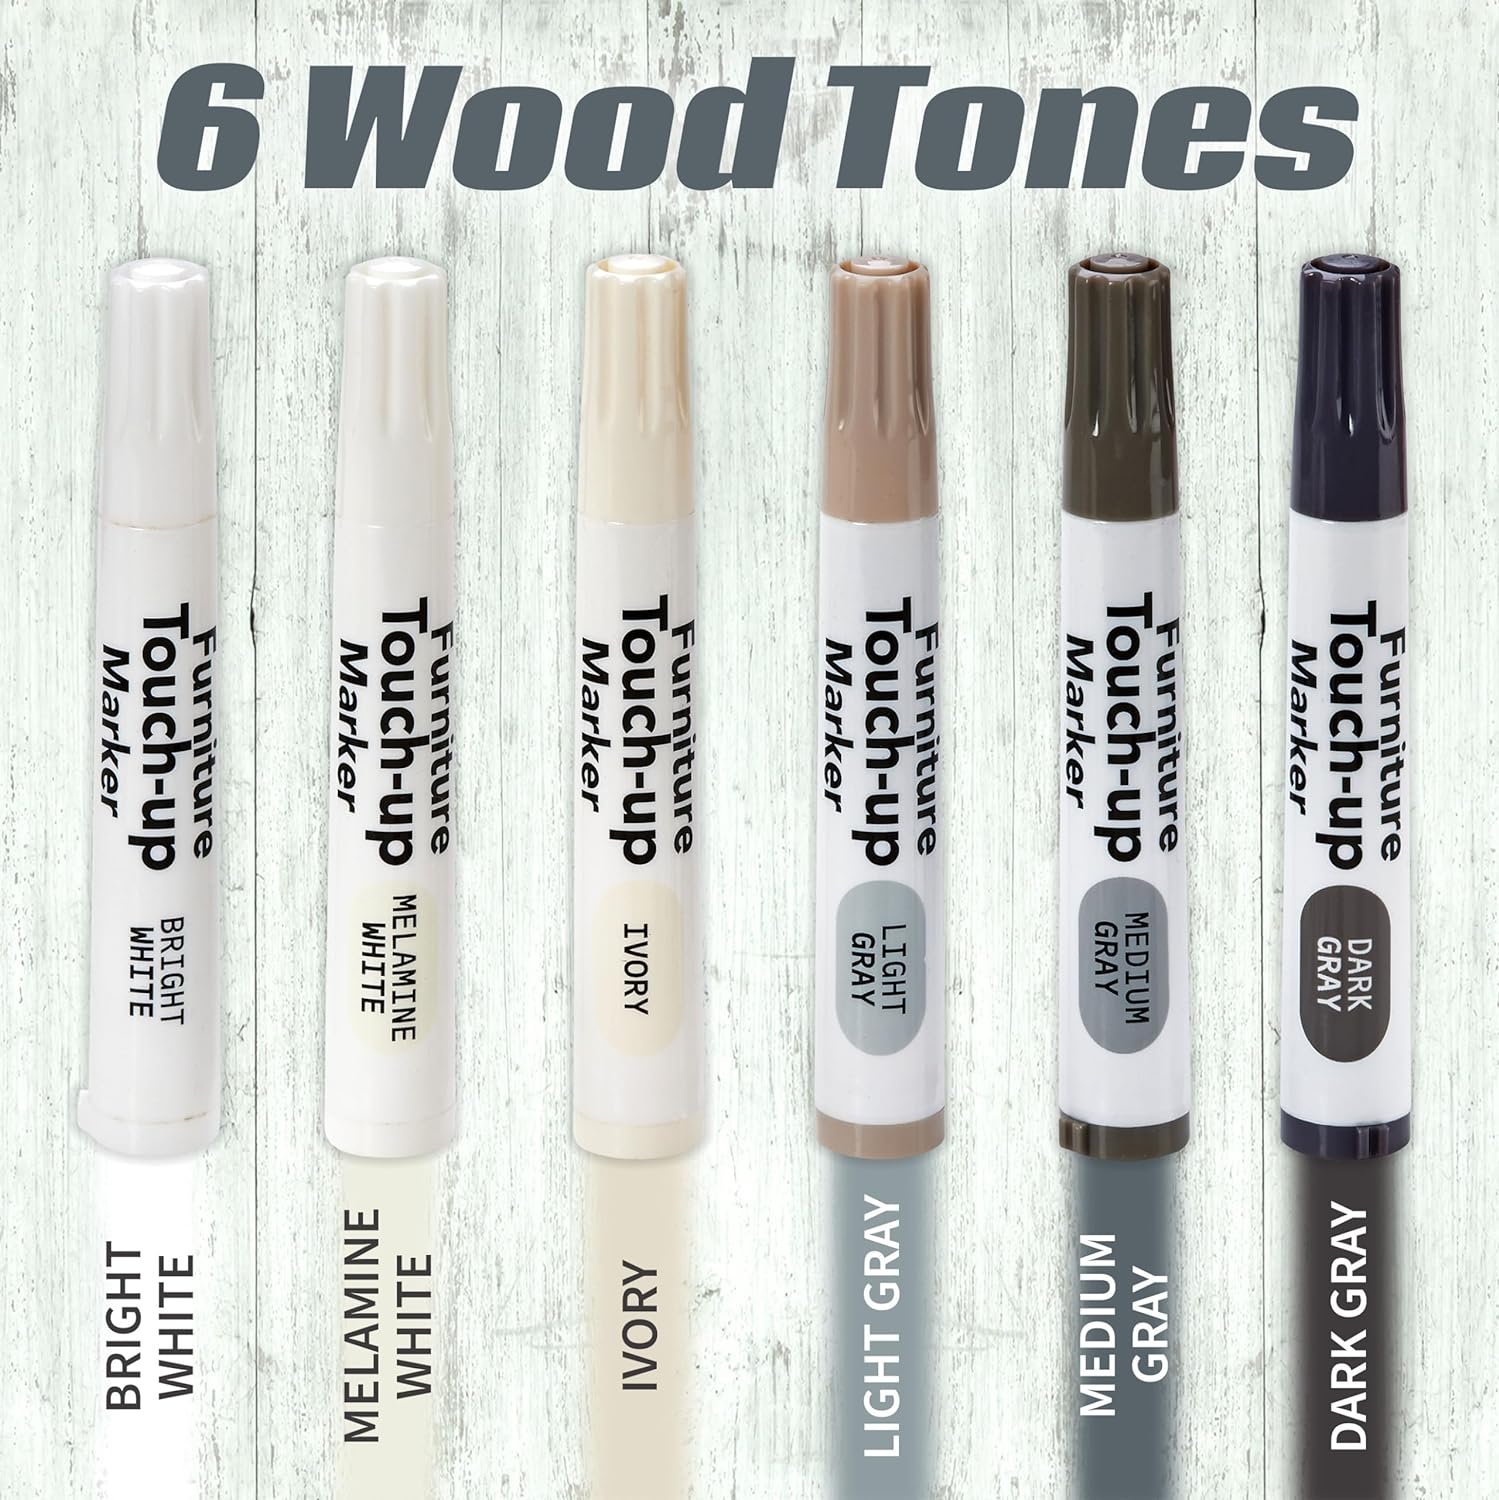 Wood Scratch Repair Kit Markers - Set of 13 Light Colors - Scratch & Stain Markers, Furniture Repair Pens for Touch-Up on Wood Furniture, Tables, Desks, Bedposts - Carpenter's Toolkit : Health & Household